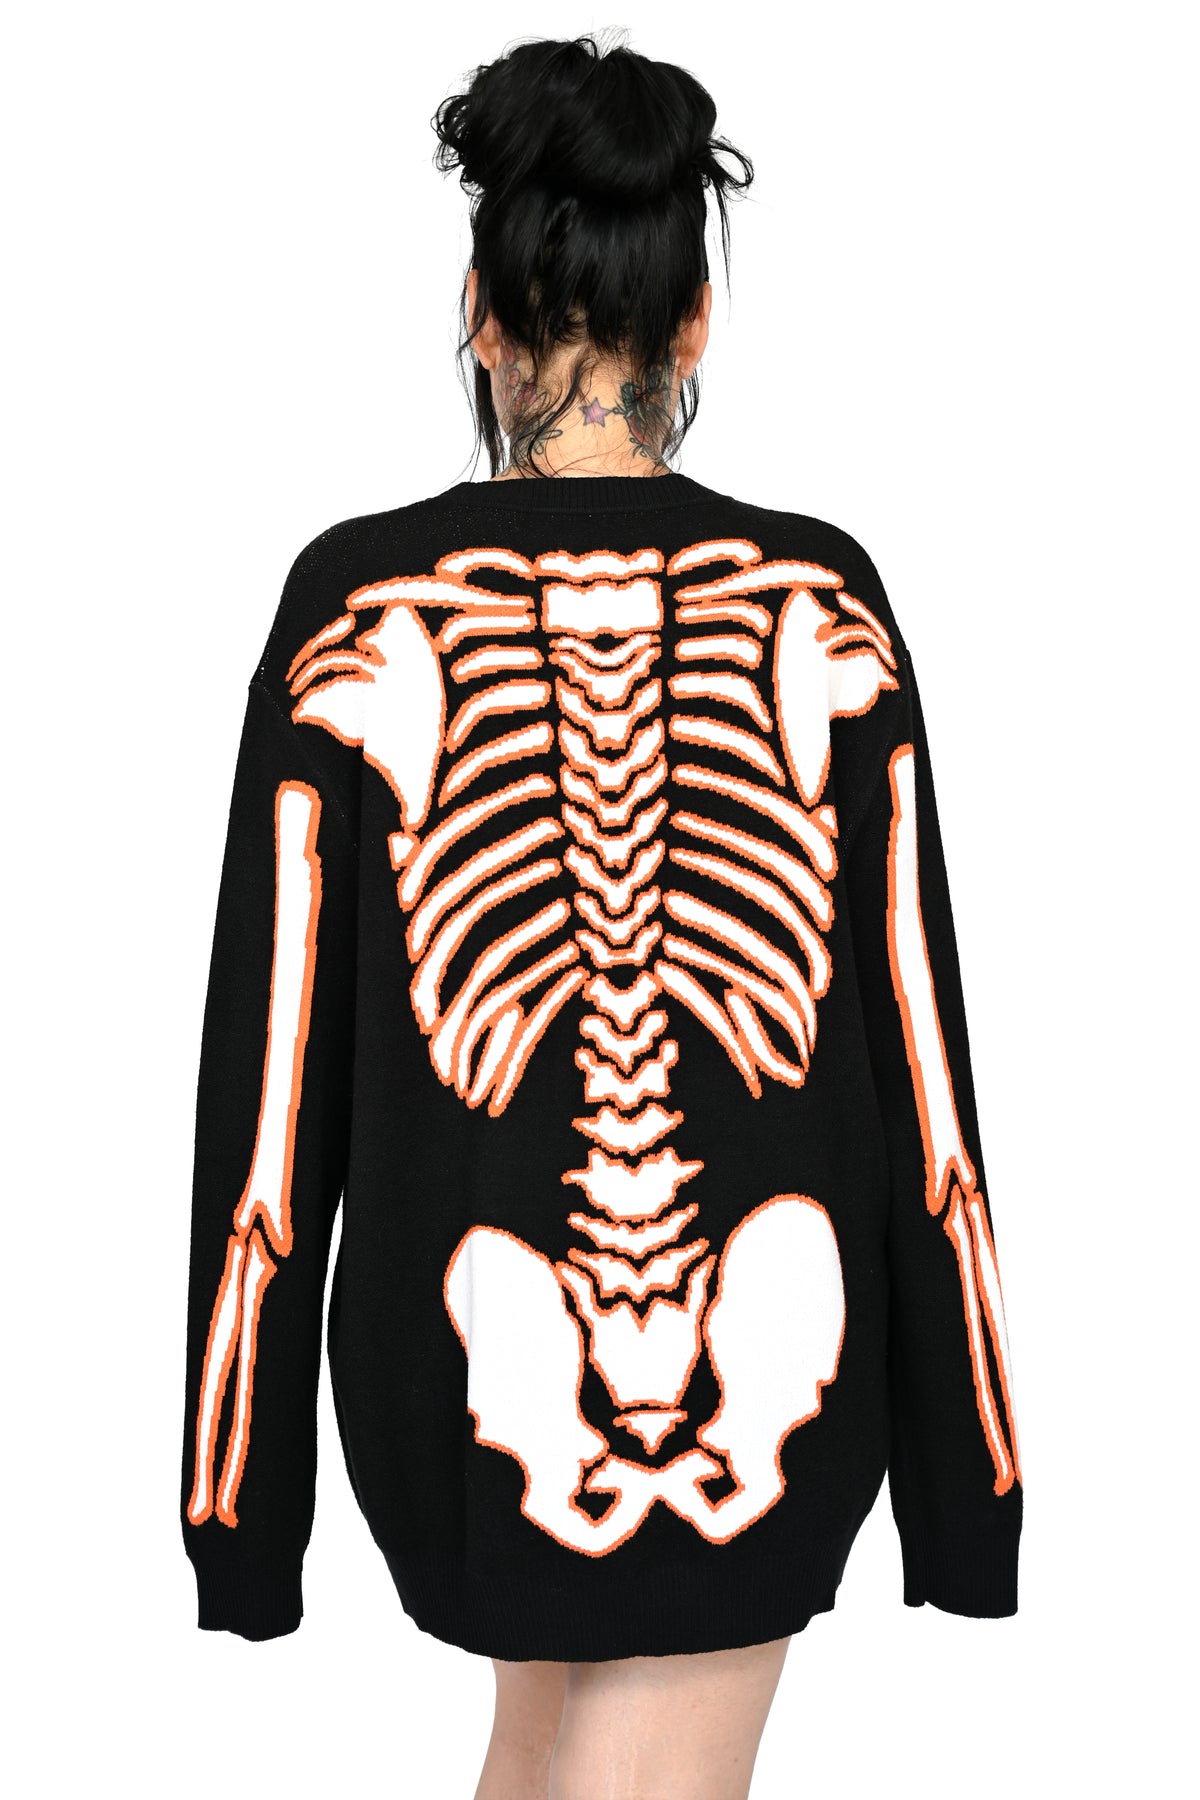 black sweater with orange and glow in the dark white skeleton print on front and back